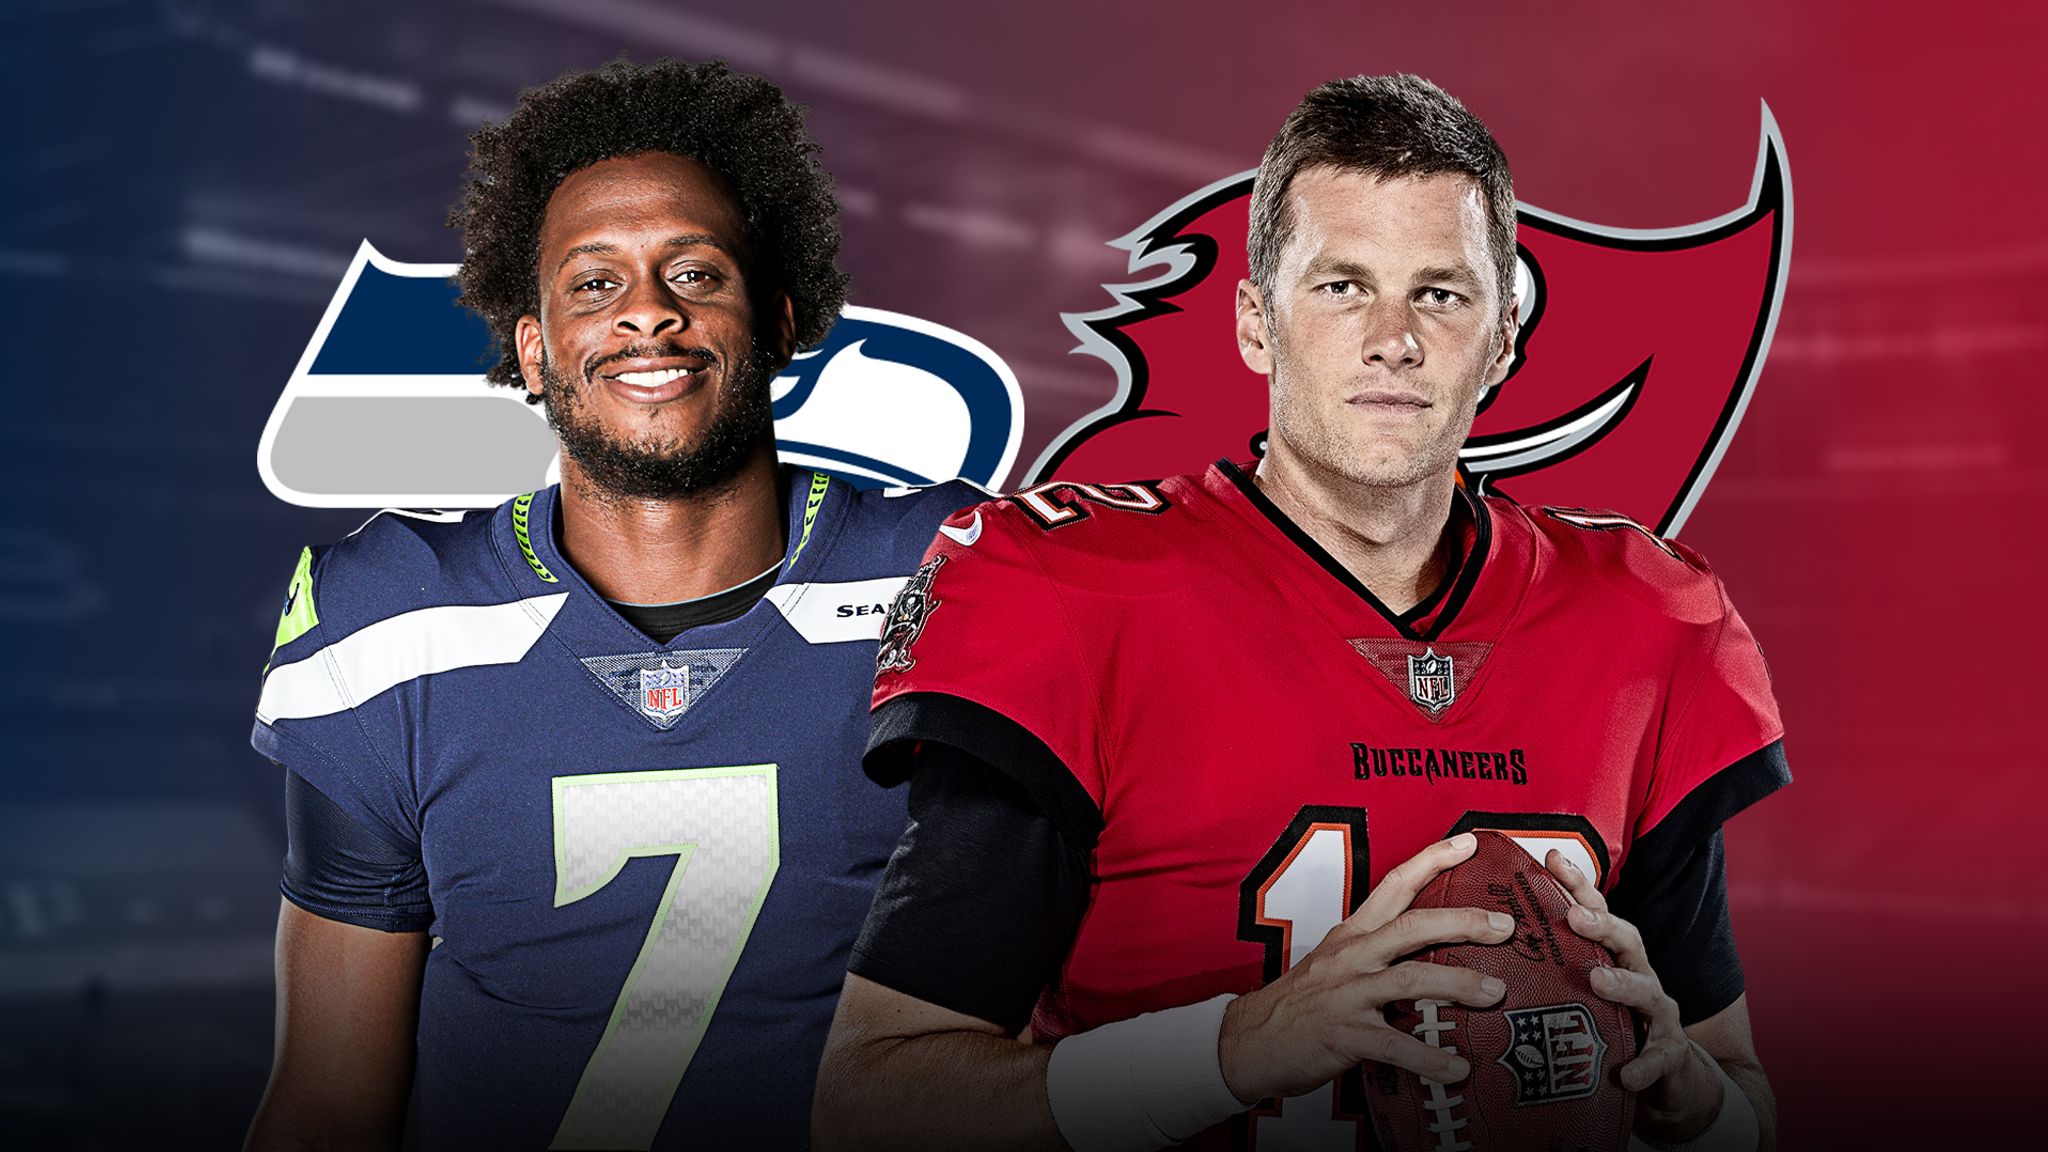 Tampa Bay Buccaneers play Seattle Seahawks on Sunday in Germany